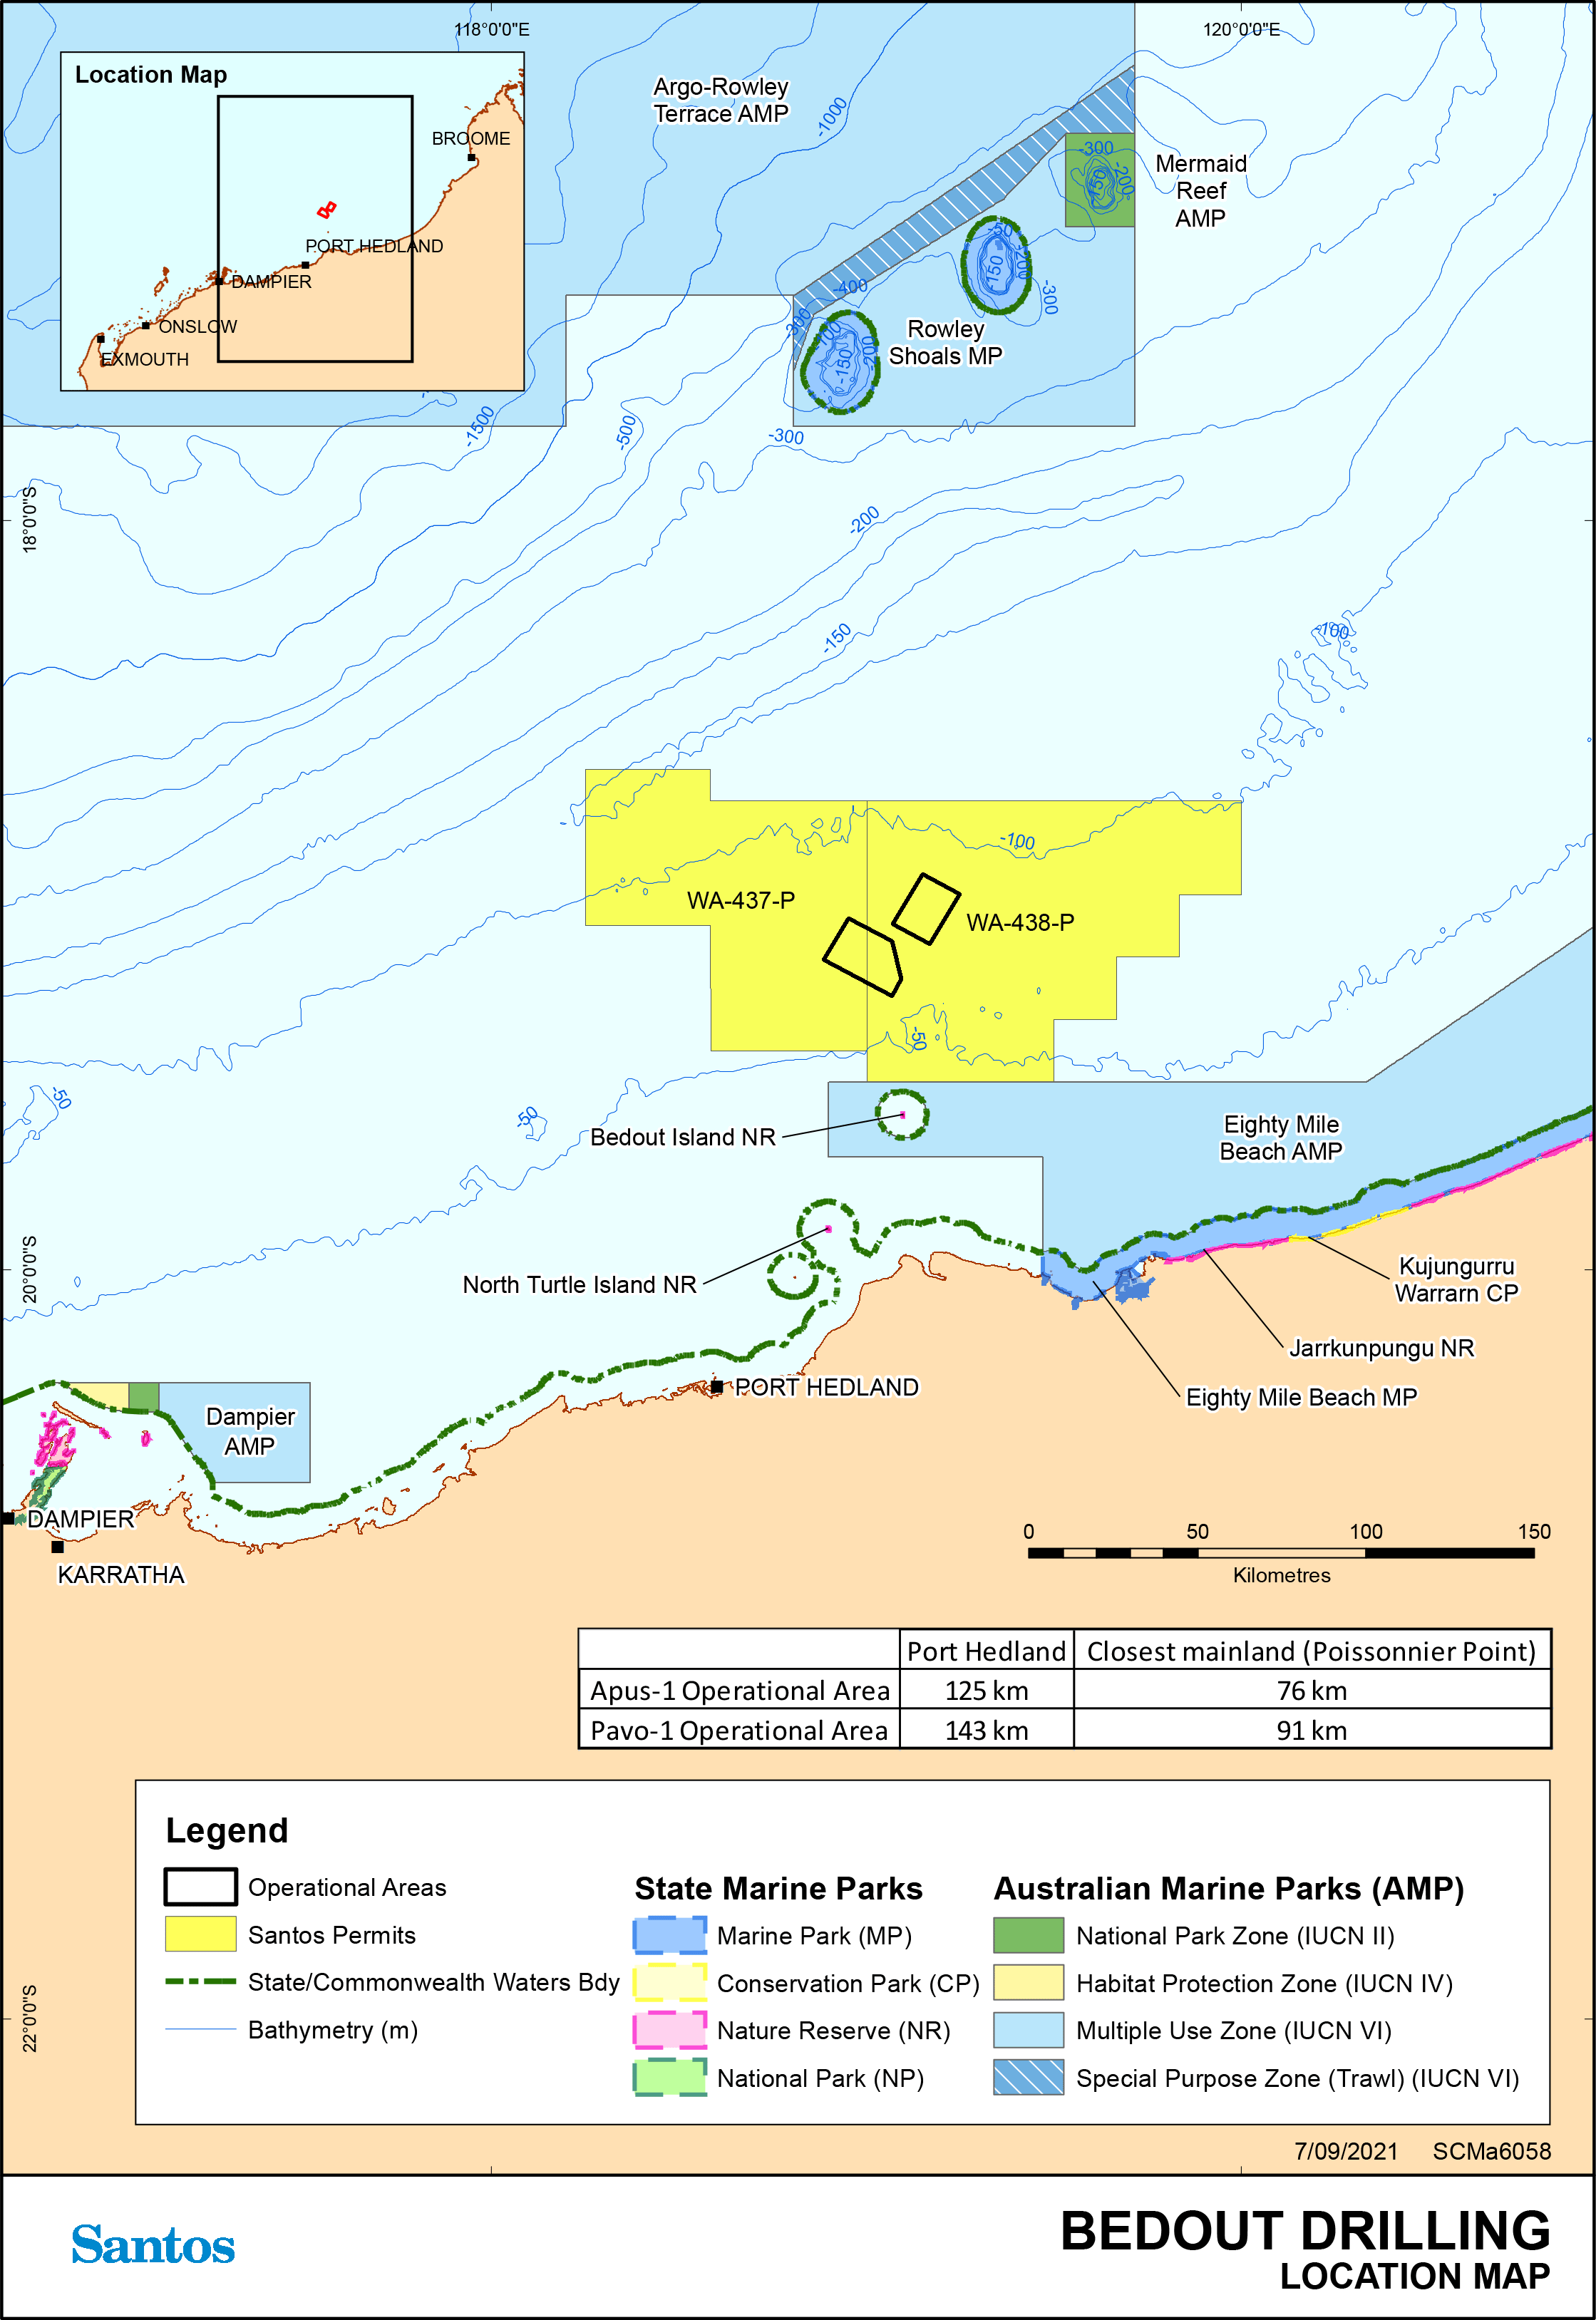 Location map - Activity: Bedout Multi-Well Drilling (refer to description)